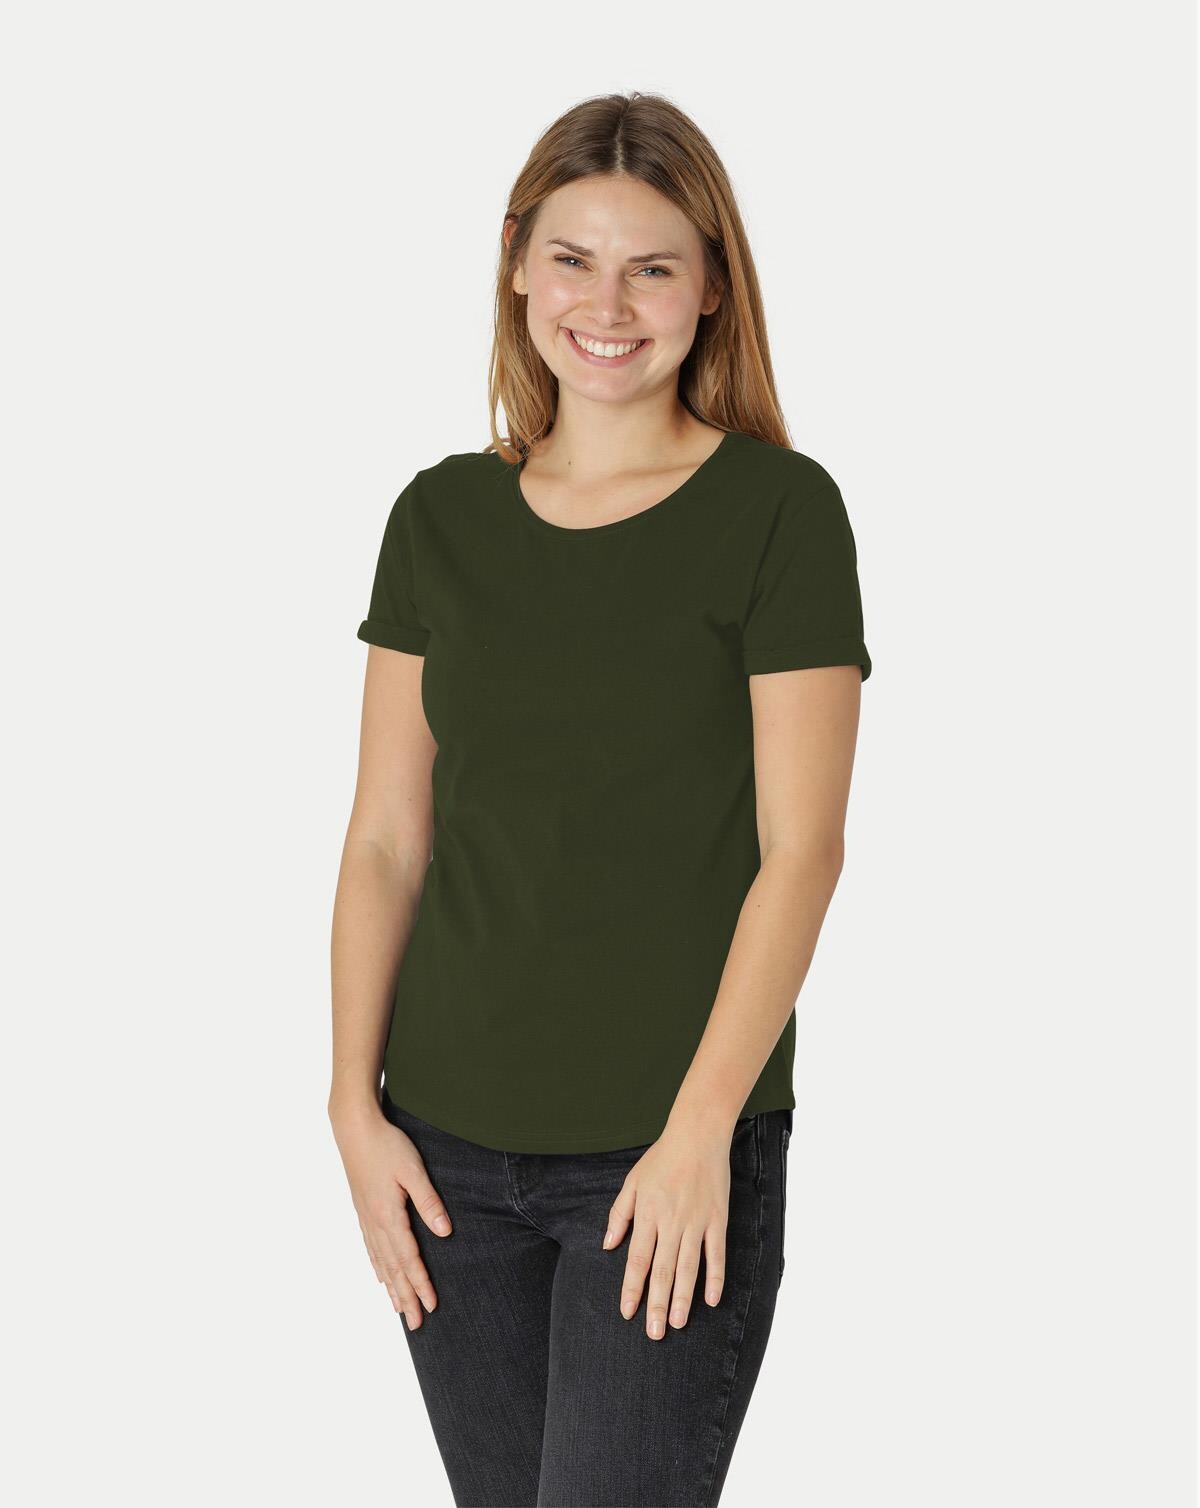 Neutral Organic - Ladies Roll Up Sleeve T-shirt (Oliven, XL)